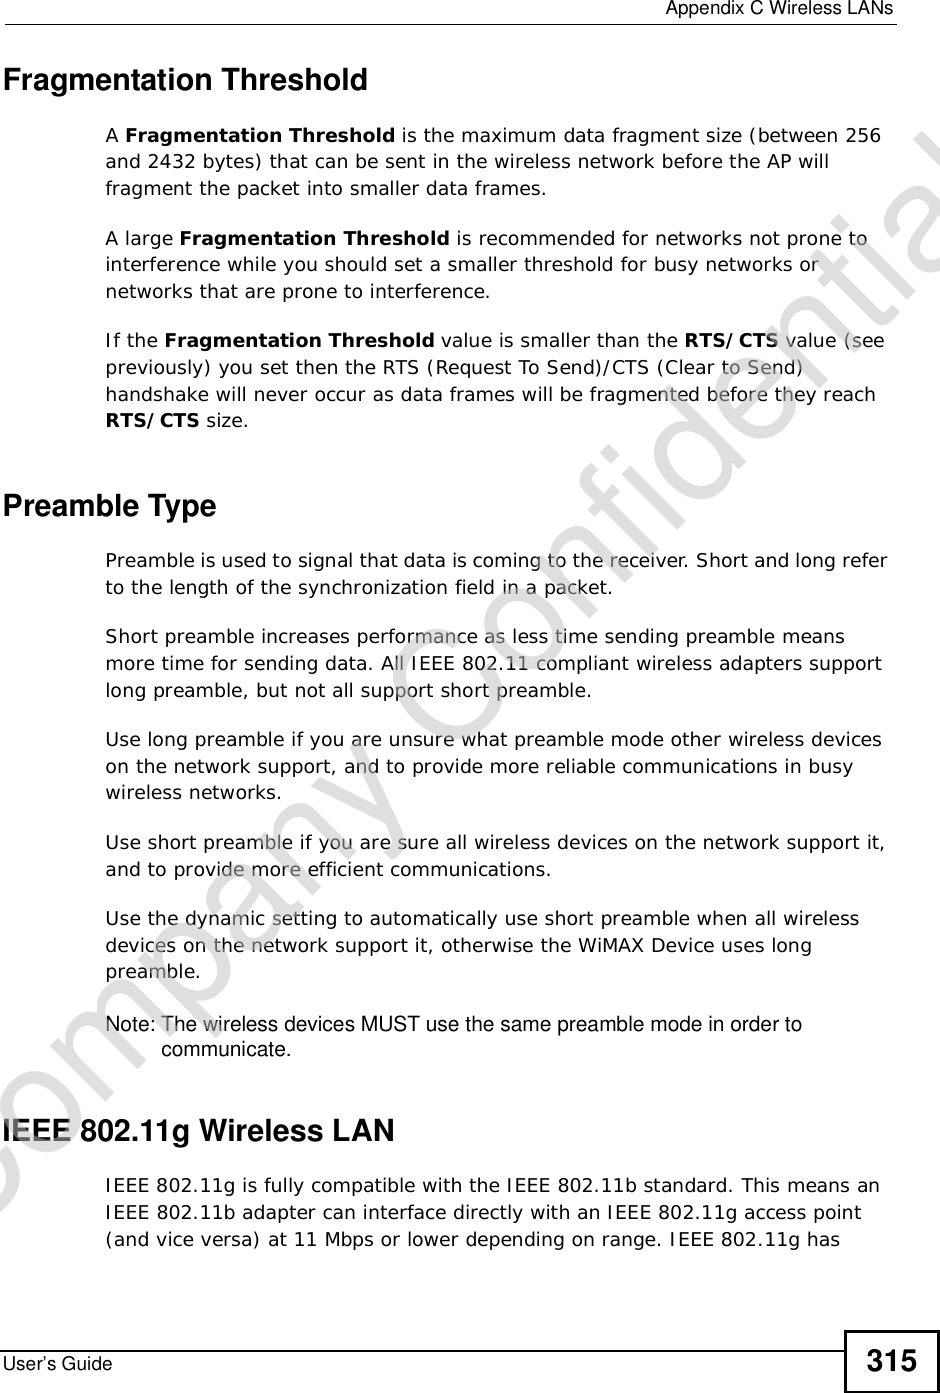  Appendix CWireless LANsUser’s Guide 315Fragmentation ThresholdAFragmentation Threshold is the maximum data fragment size (between 256 and 2432 bytes) that can be sent in the wireless network before the AP will fragment the packet into smaller data frames.A large Fragmentation Threshold is recommended for networks not prone to interference while you should set a smaller threshold for busy networks or networks that are prone to interference.If the Fragmentation Threshold value is smaller than the RTS/CTS value (see previously) you set then the RTS (Request To Send)/CTS (Clear to Send) handshake will never occur as data frames will be fragmented before they reach RTS/CTS size.Preamble TypePreamble is used to signal that data is coming to the receiver. Short and long refer to the length of the synchronization field in a packet.Short preamble increases performance as less time sending preamble means more time for sending data. All IEEE 802.11 compliant wireless adapters support long preamble, but not all support short preamble. Use long preamble if you are unsure what preamble mode other wireless devices on the network support, and to provide more reliable communications in busy wireless networks. Use short preamble if you are sure all wireless devices on the network support it, and to provide more efficient communications.Use the dynamic setting to automatically use short preamble when all wireless devices on the network support it, otherwise the WiMAX Device uses long preamble.Note: The wireless devices MUSTuse the same preamble mode in order to communicate.IEEE 802.11g Wireless LANIEEE 802.11g is fully compatible with the IEEE 802.11b standard. This means an IEEE 802.11b adapter can interface directly with an IEEE 802.11g access point (and vice versa) at 11 Mbps or lower depending on range. IEEE 802.11g has Company Confidential